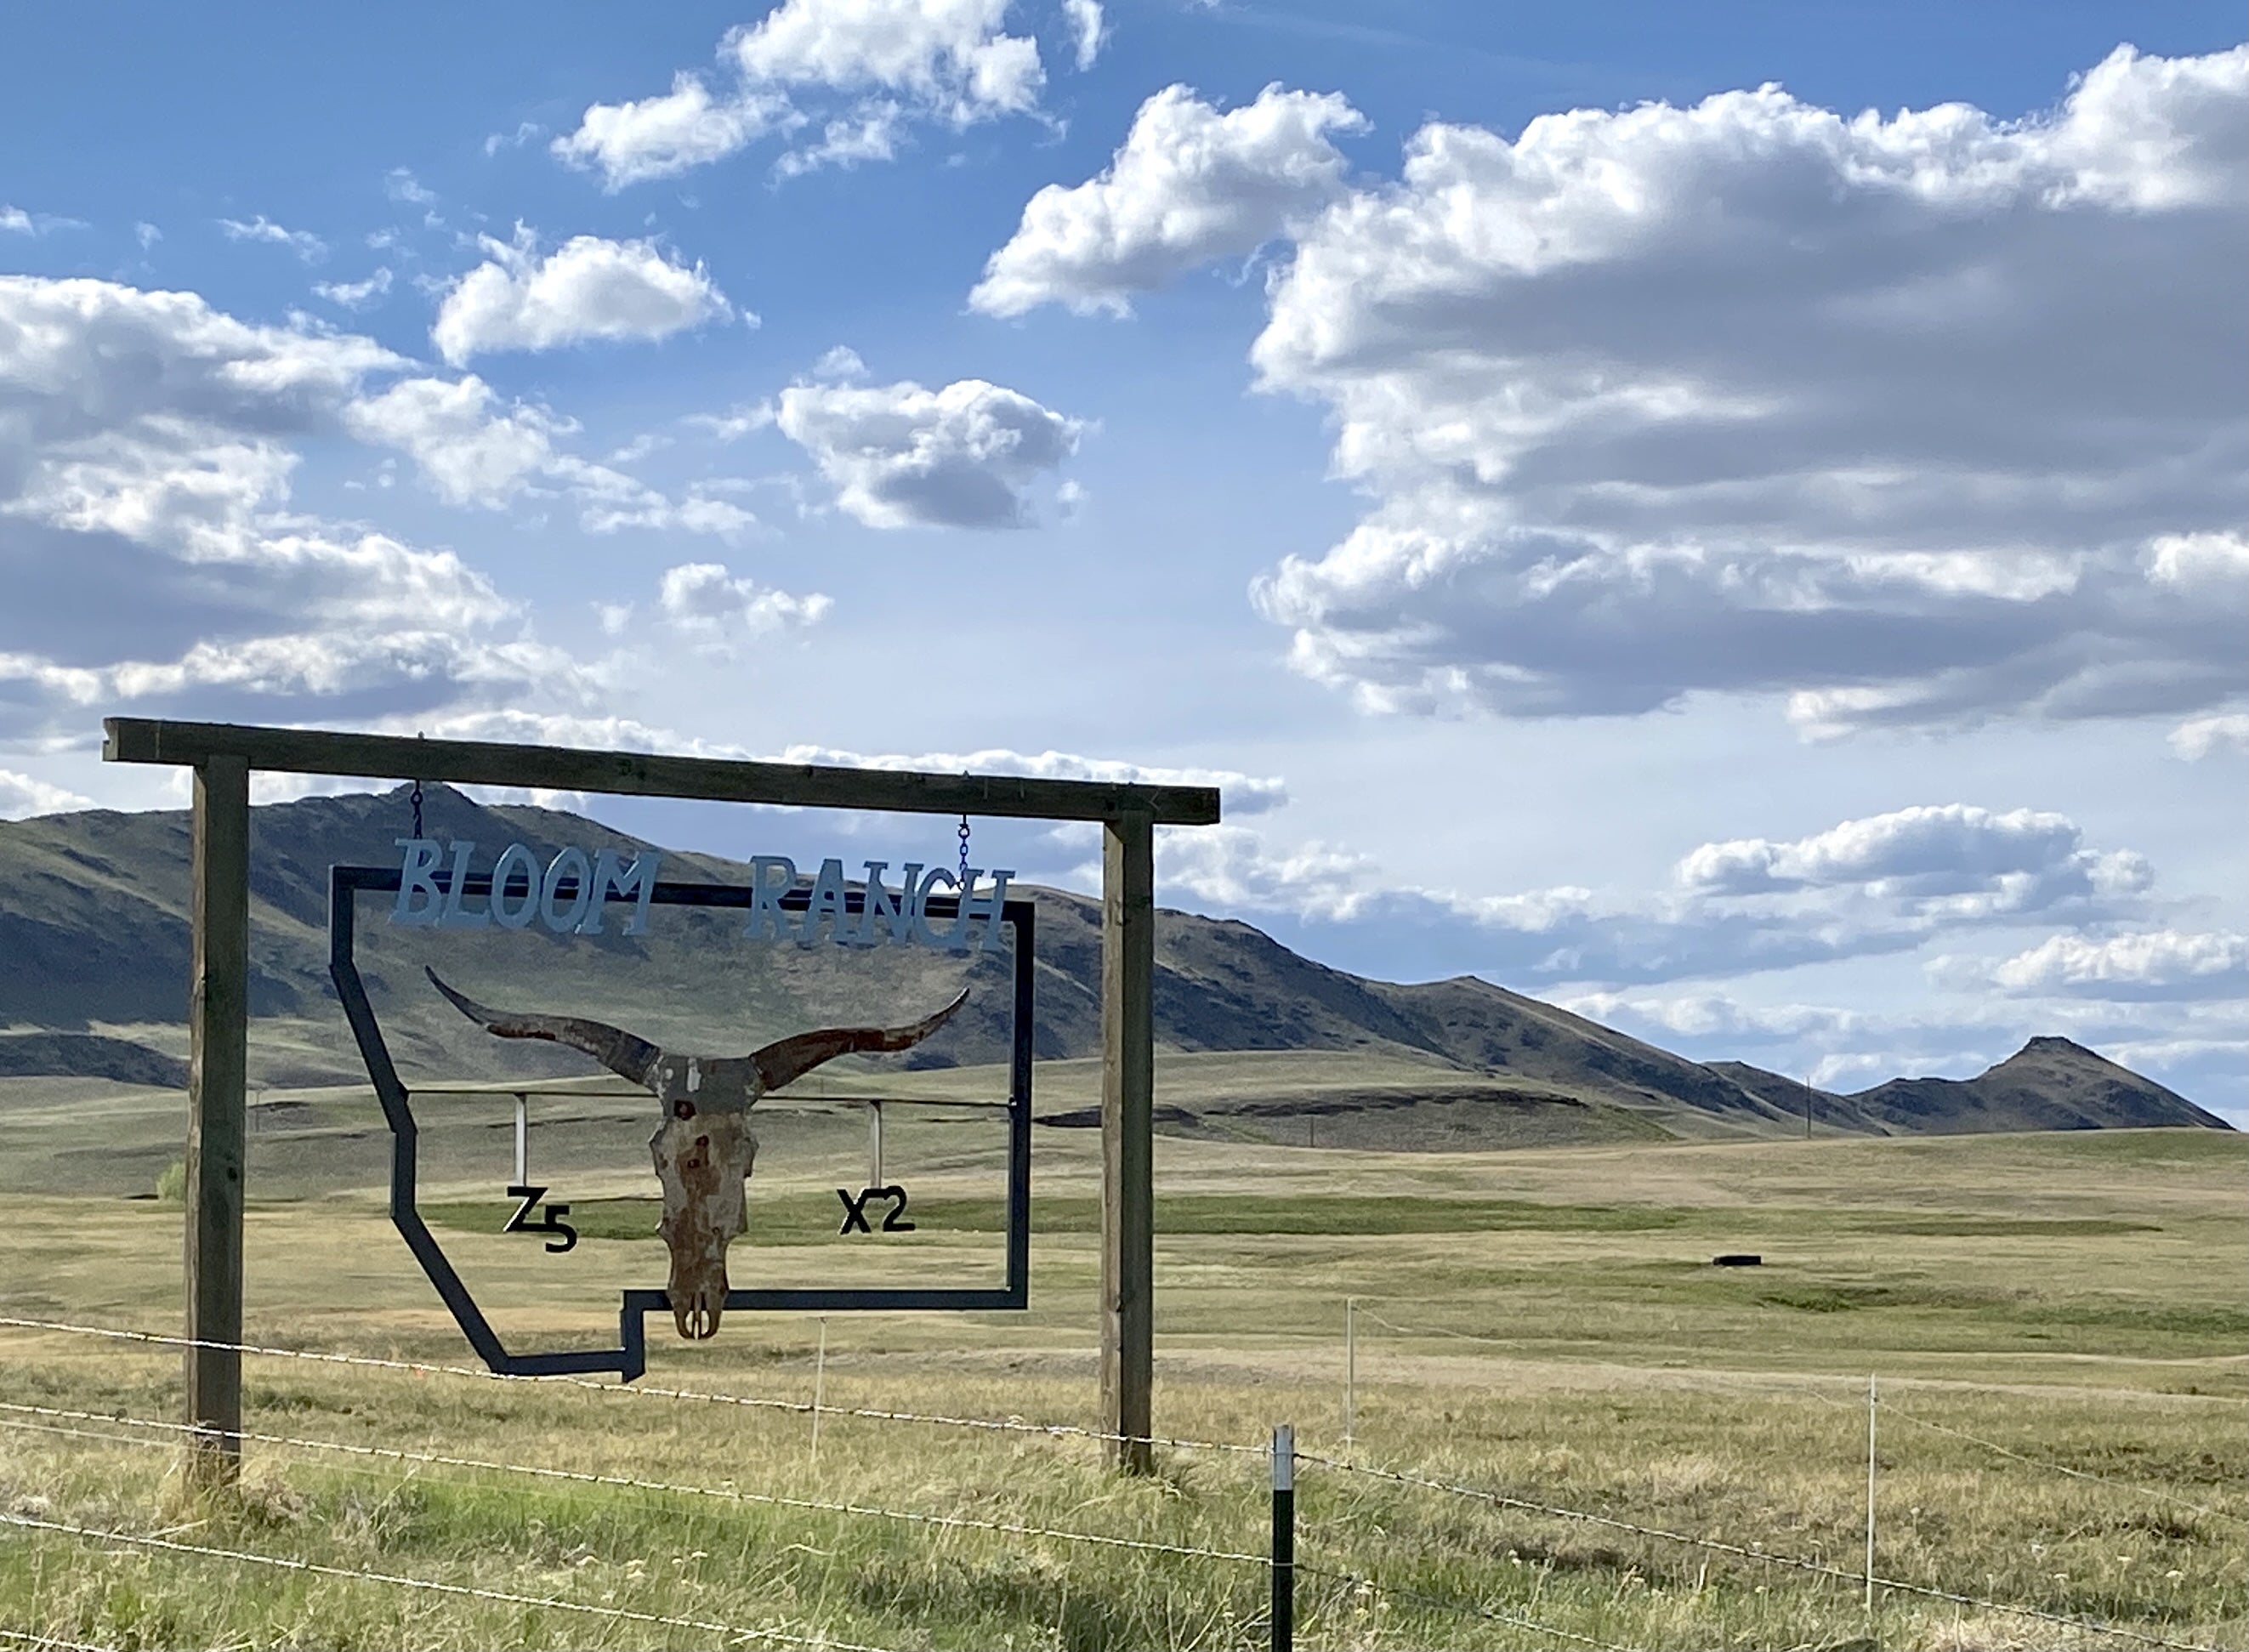 image shows a landscape view with expansive blue sky, rugged hills and grassland. In the foreground is a large metal sign shaped like a longhorn cattle skull and the outline of Montana. The sign says "Bloom Ranch"